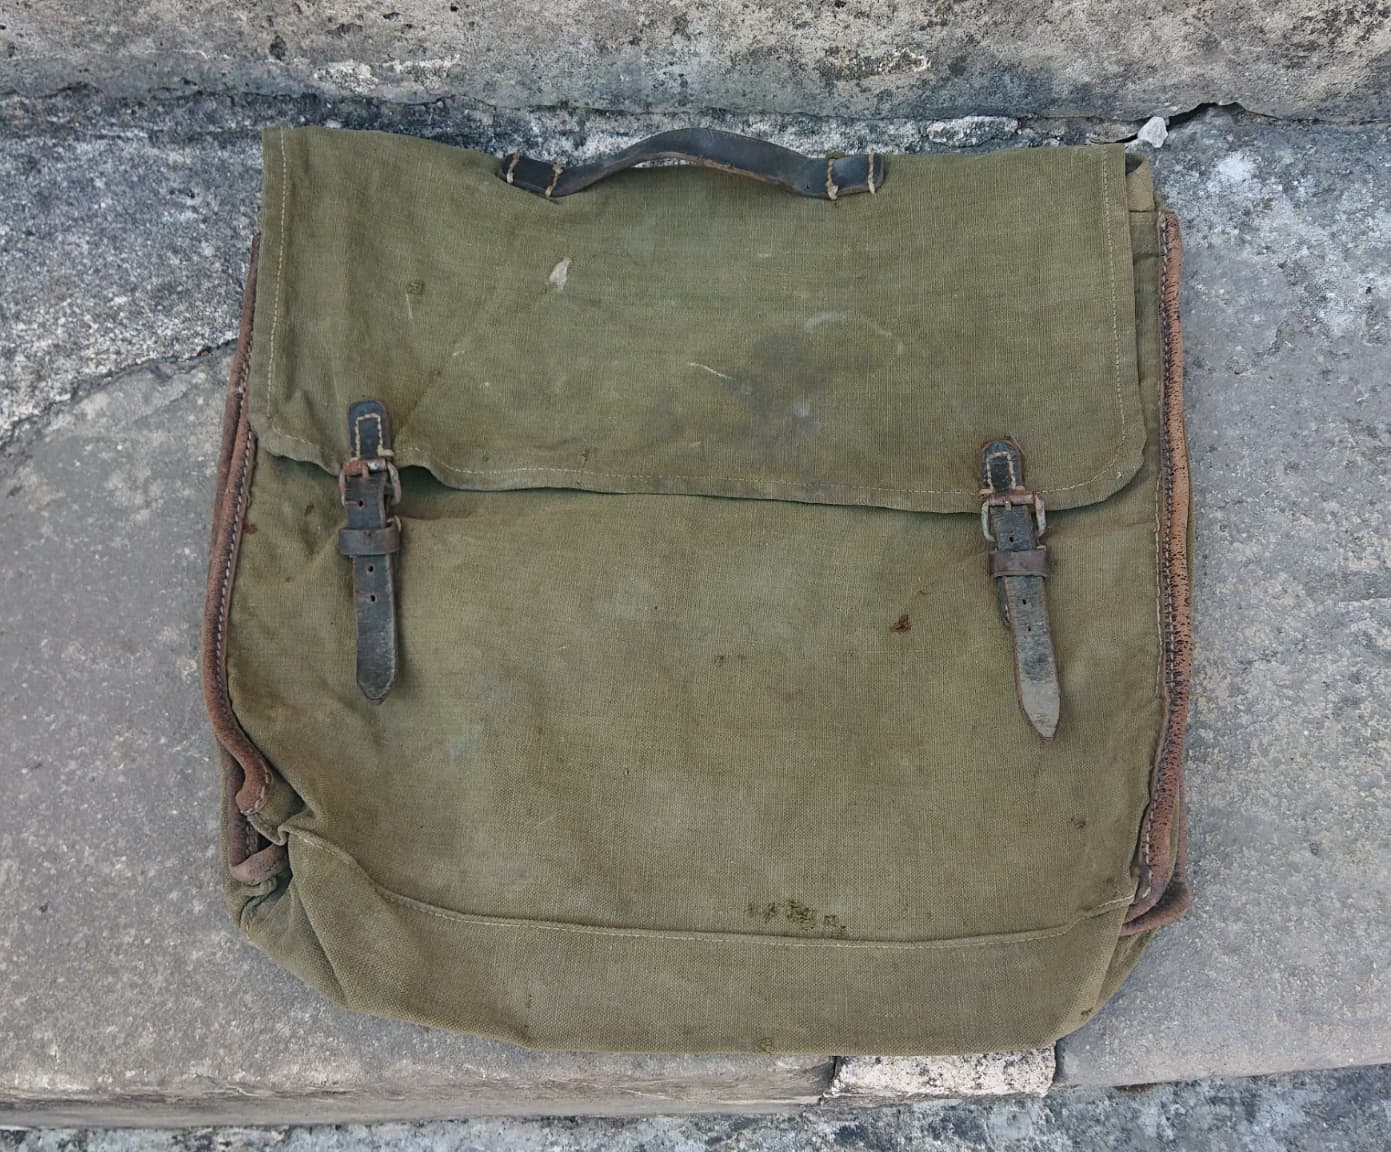 militaria : Sac effets personnels m31 / m31 personal effects bag